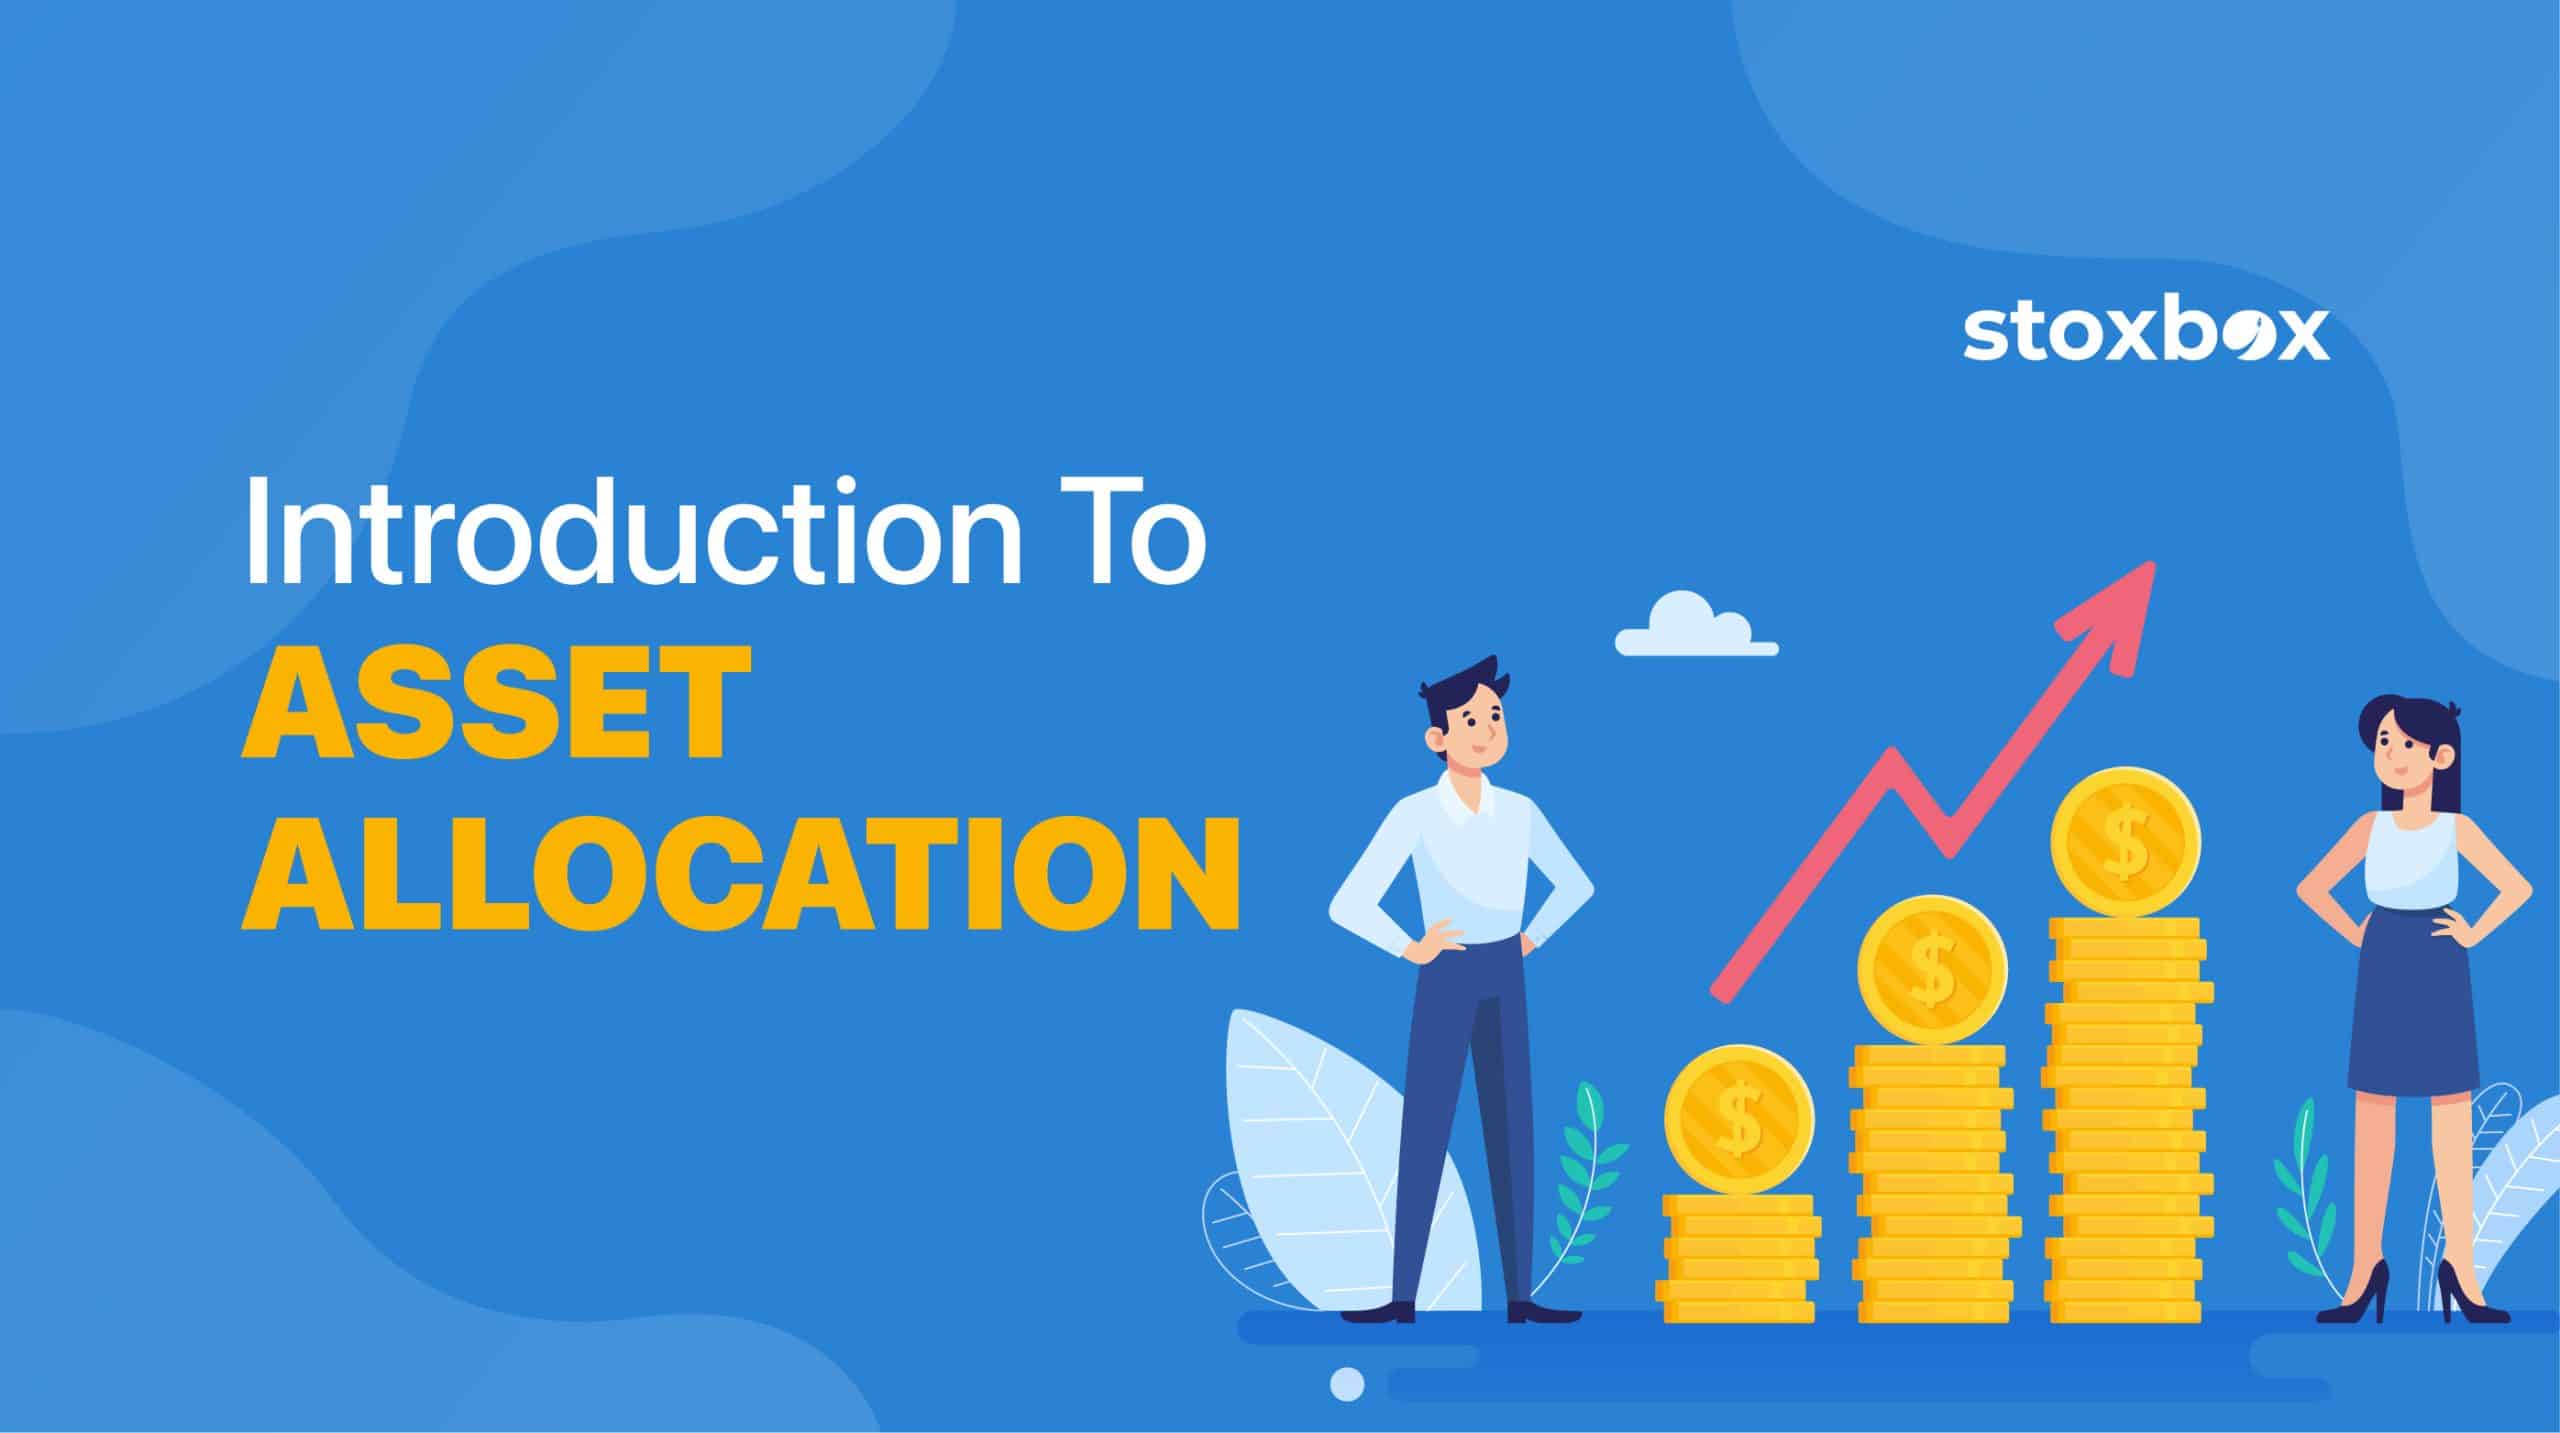 Introduction To Asset Allocation